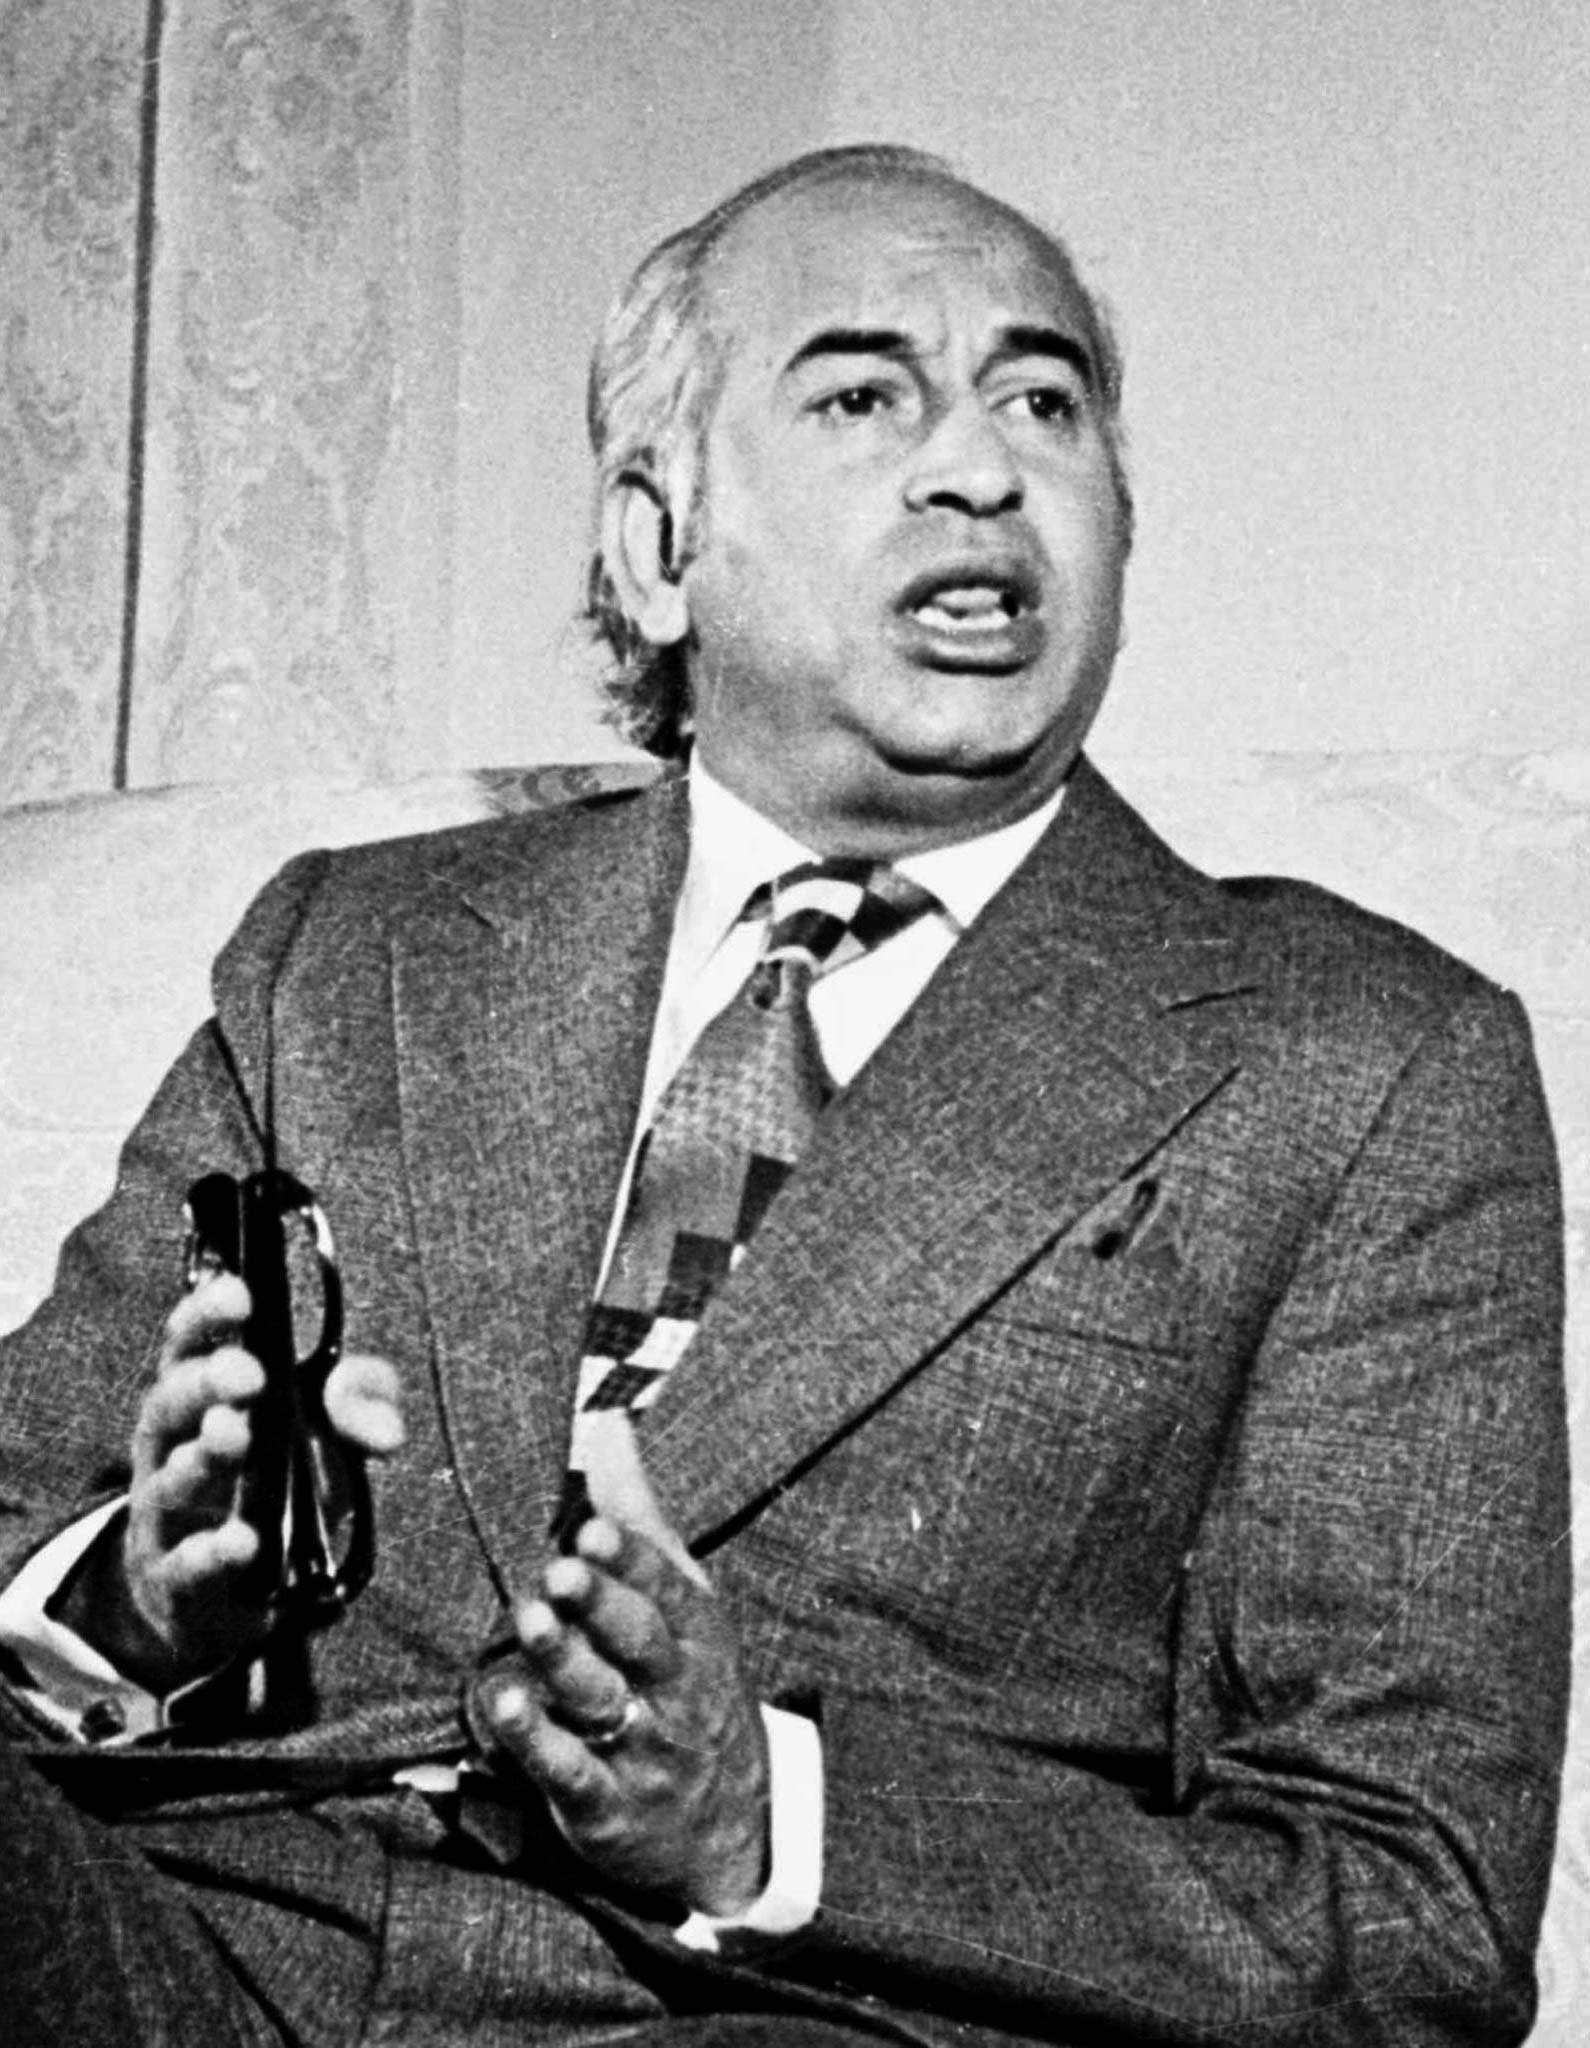 FILE PHOTO OF FORMER PRIME MINISTER OF PAKISTAN Z.A.BHUTTO.